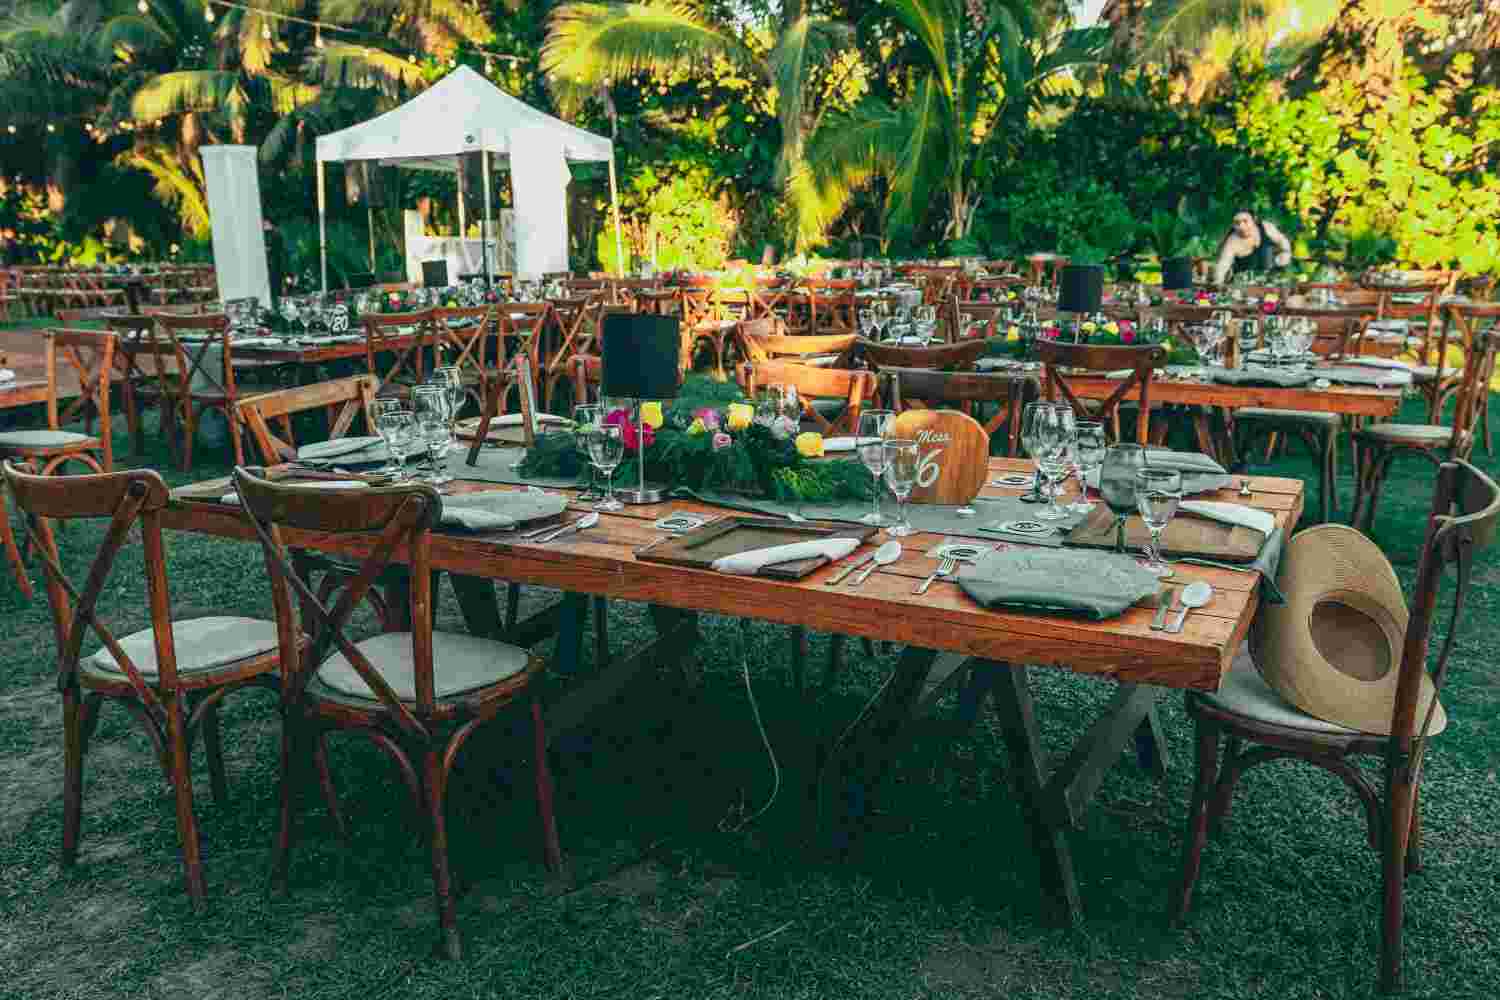 20 Types of Wedding Chairs That Are Trending